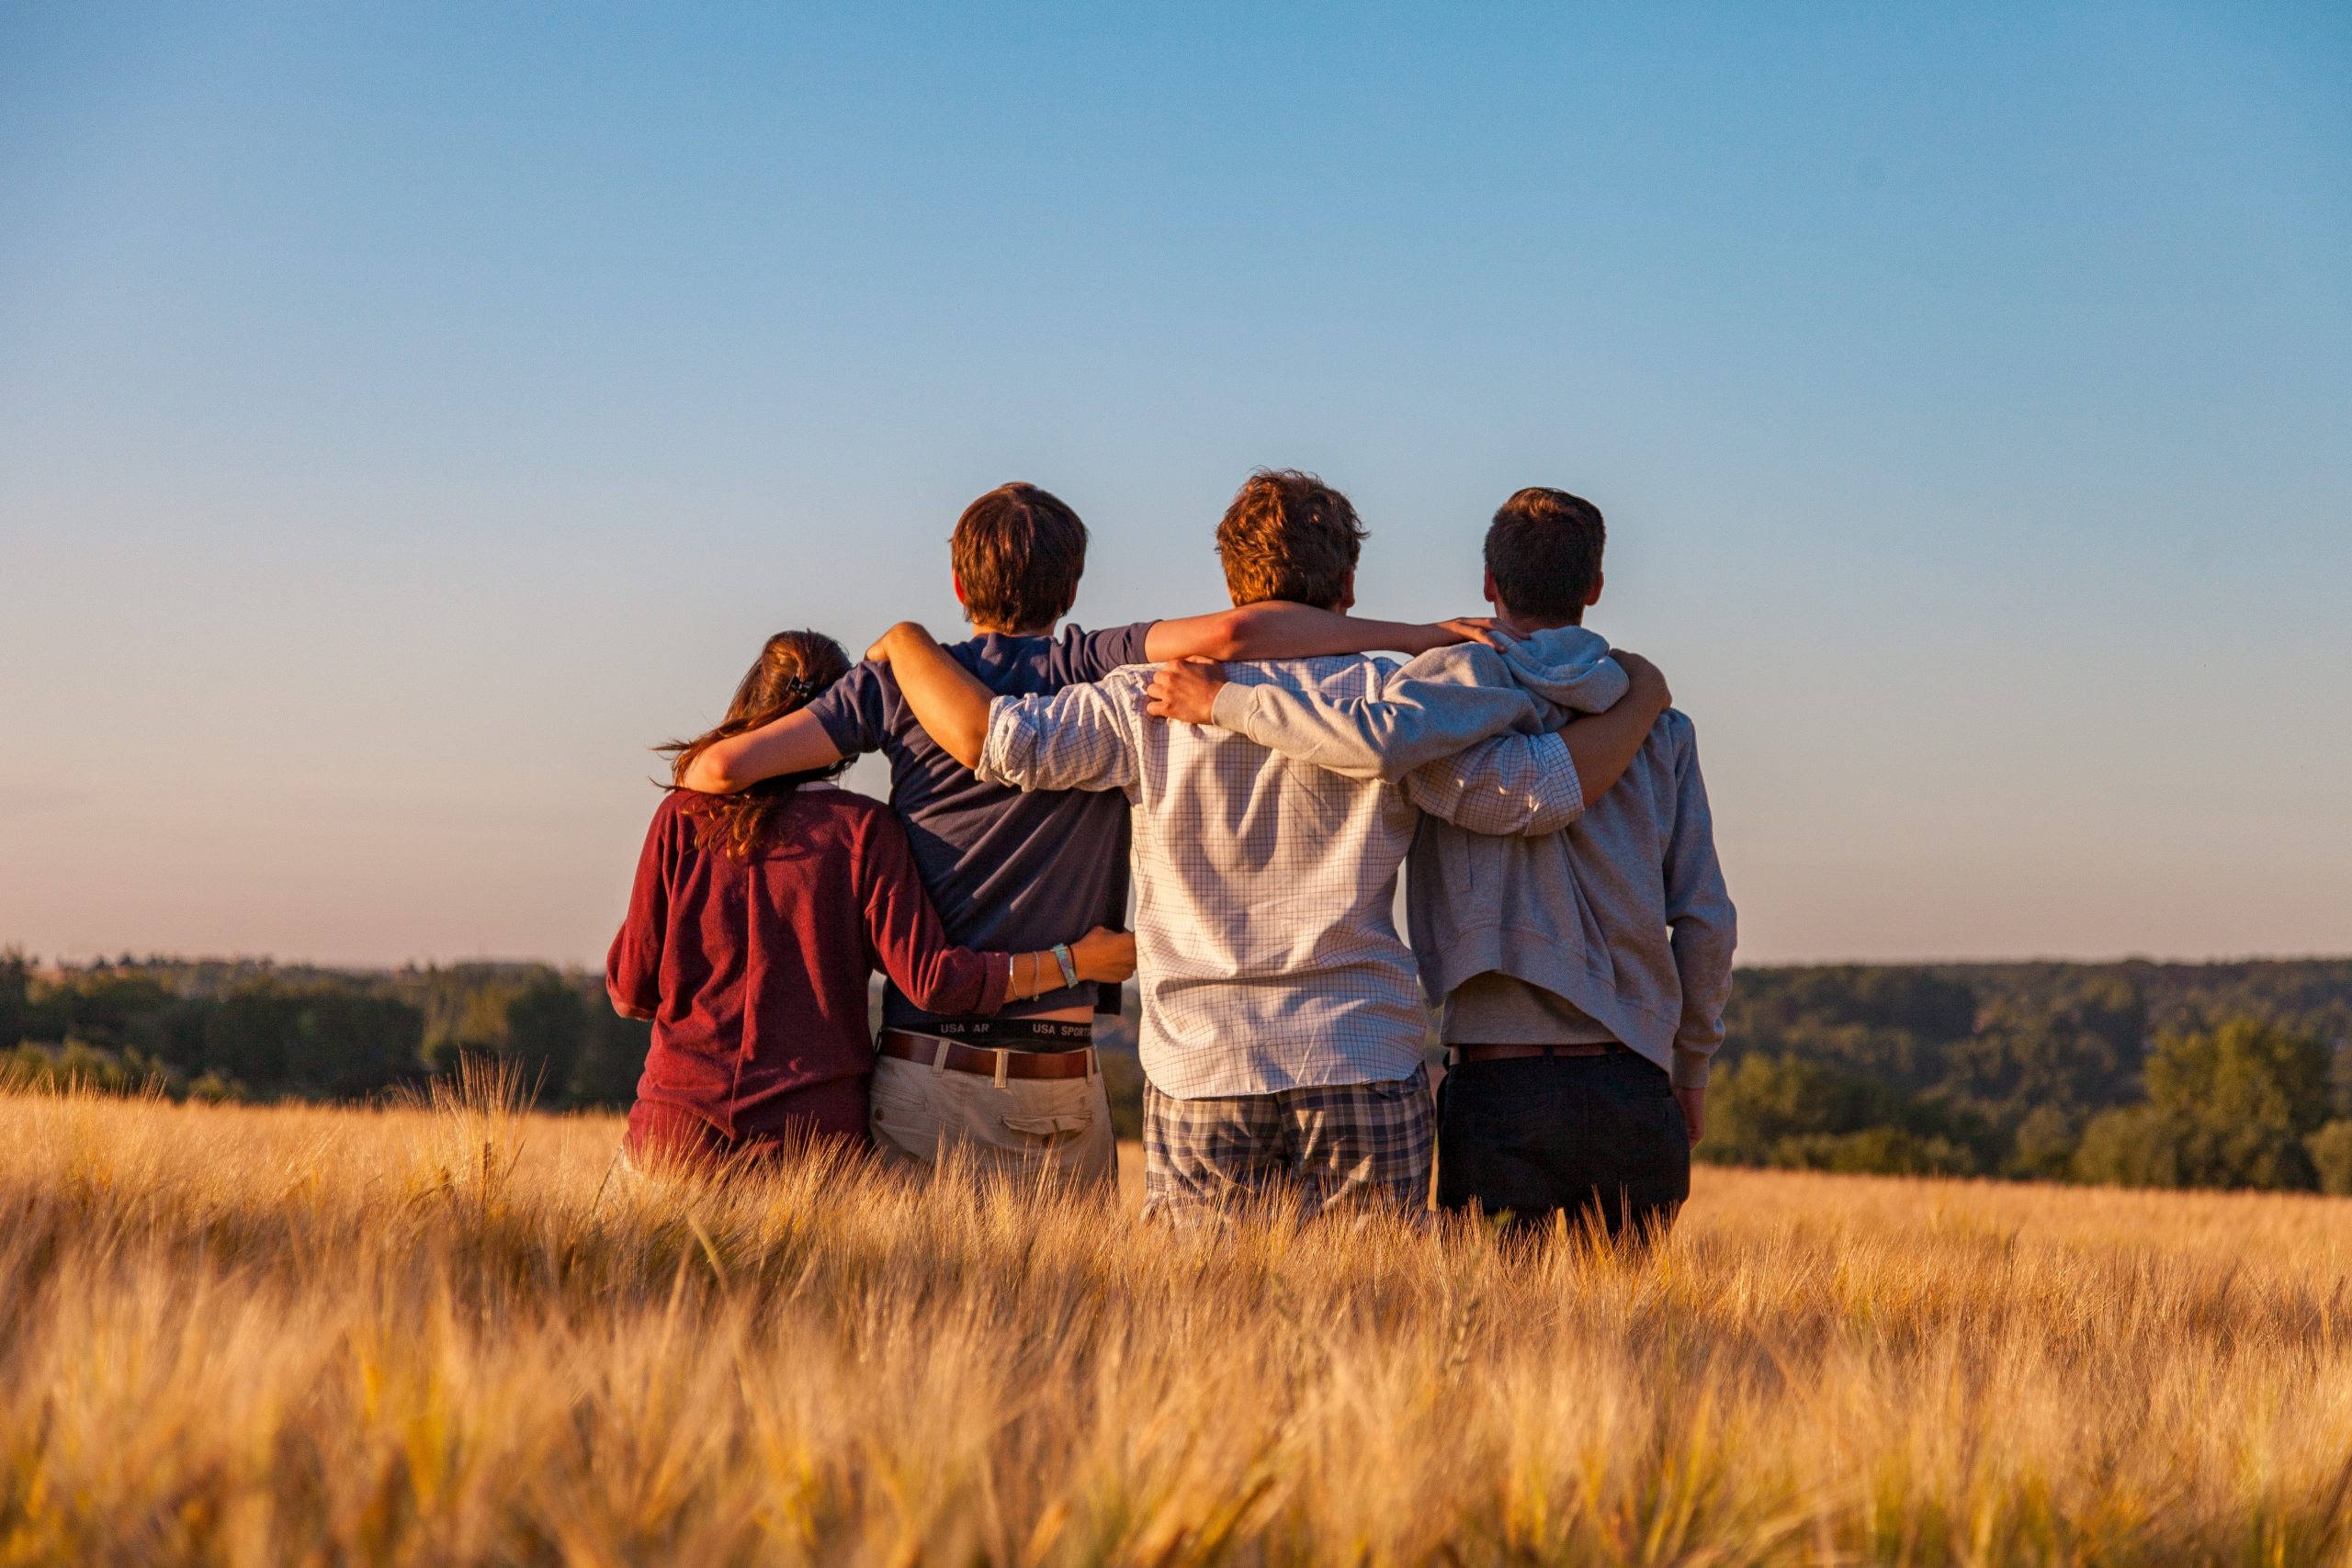 Photograph from behind of 4 people with their arms around each other, standing in a field.